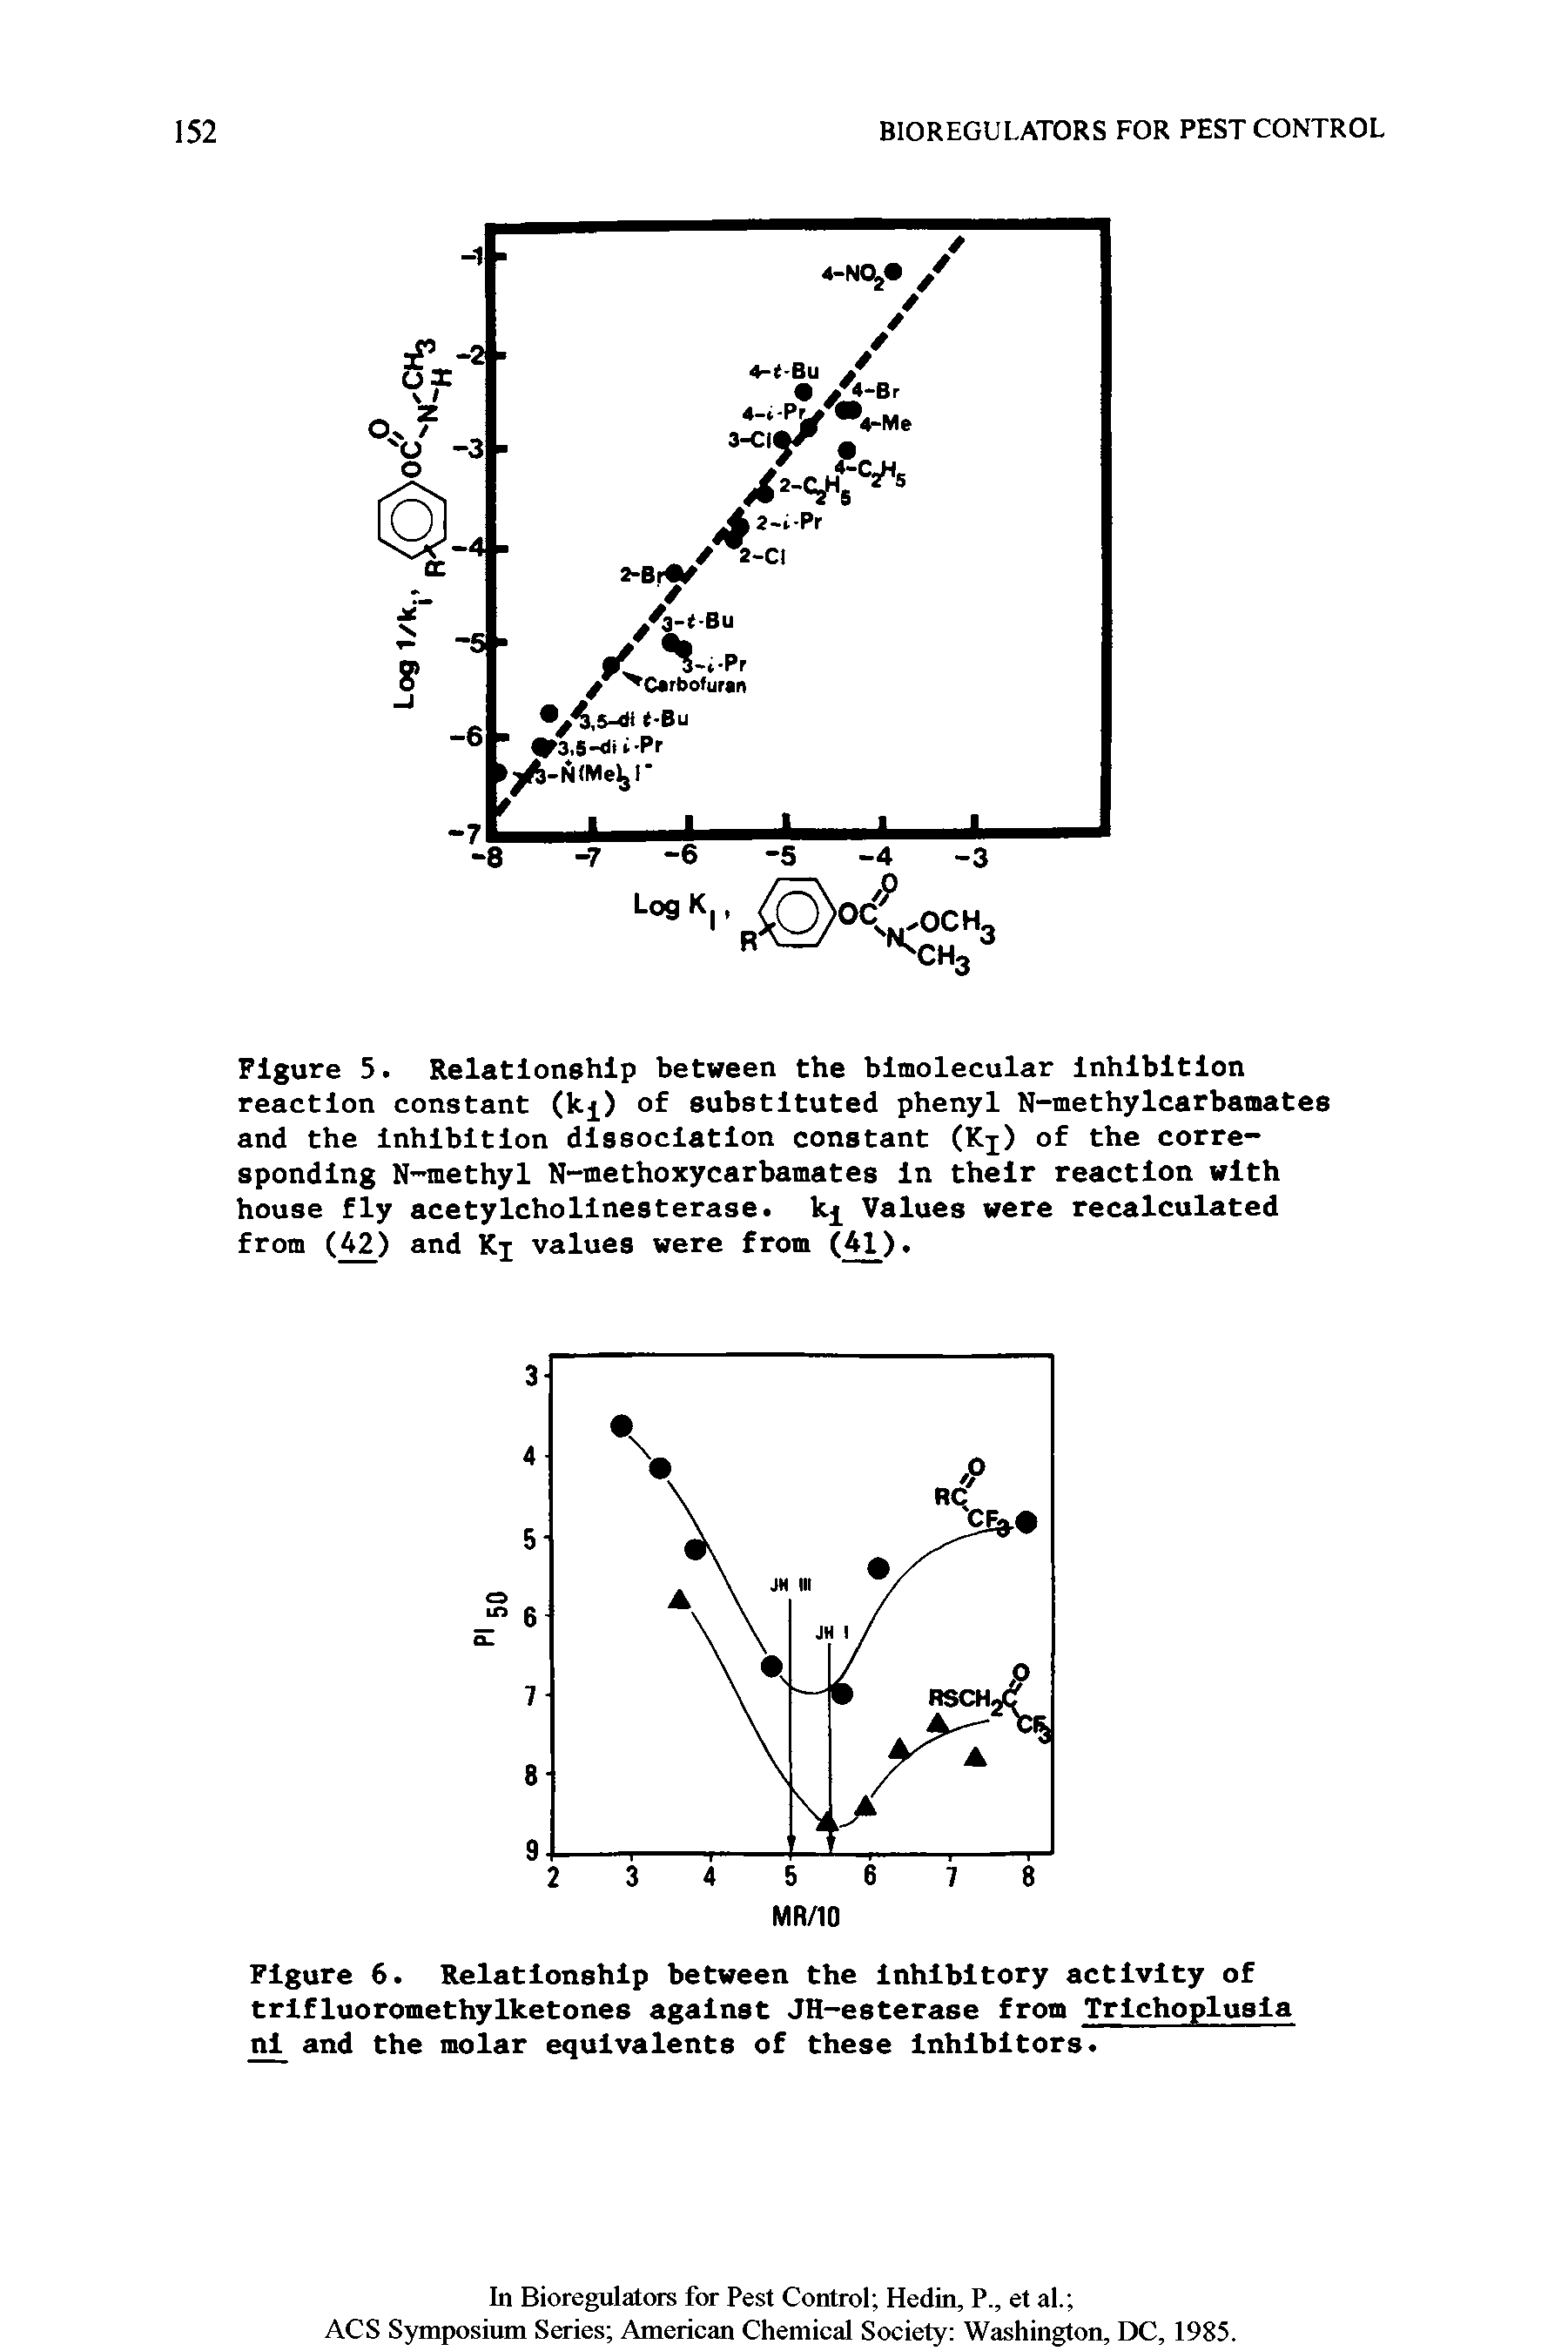 Figure 6. Relationship between the inhibitory activity of trlfluoromethylketones against JH-esterase from Trlchoplusla nl and the molar equivalents of these inhibitors.